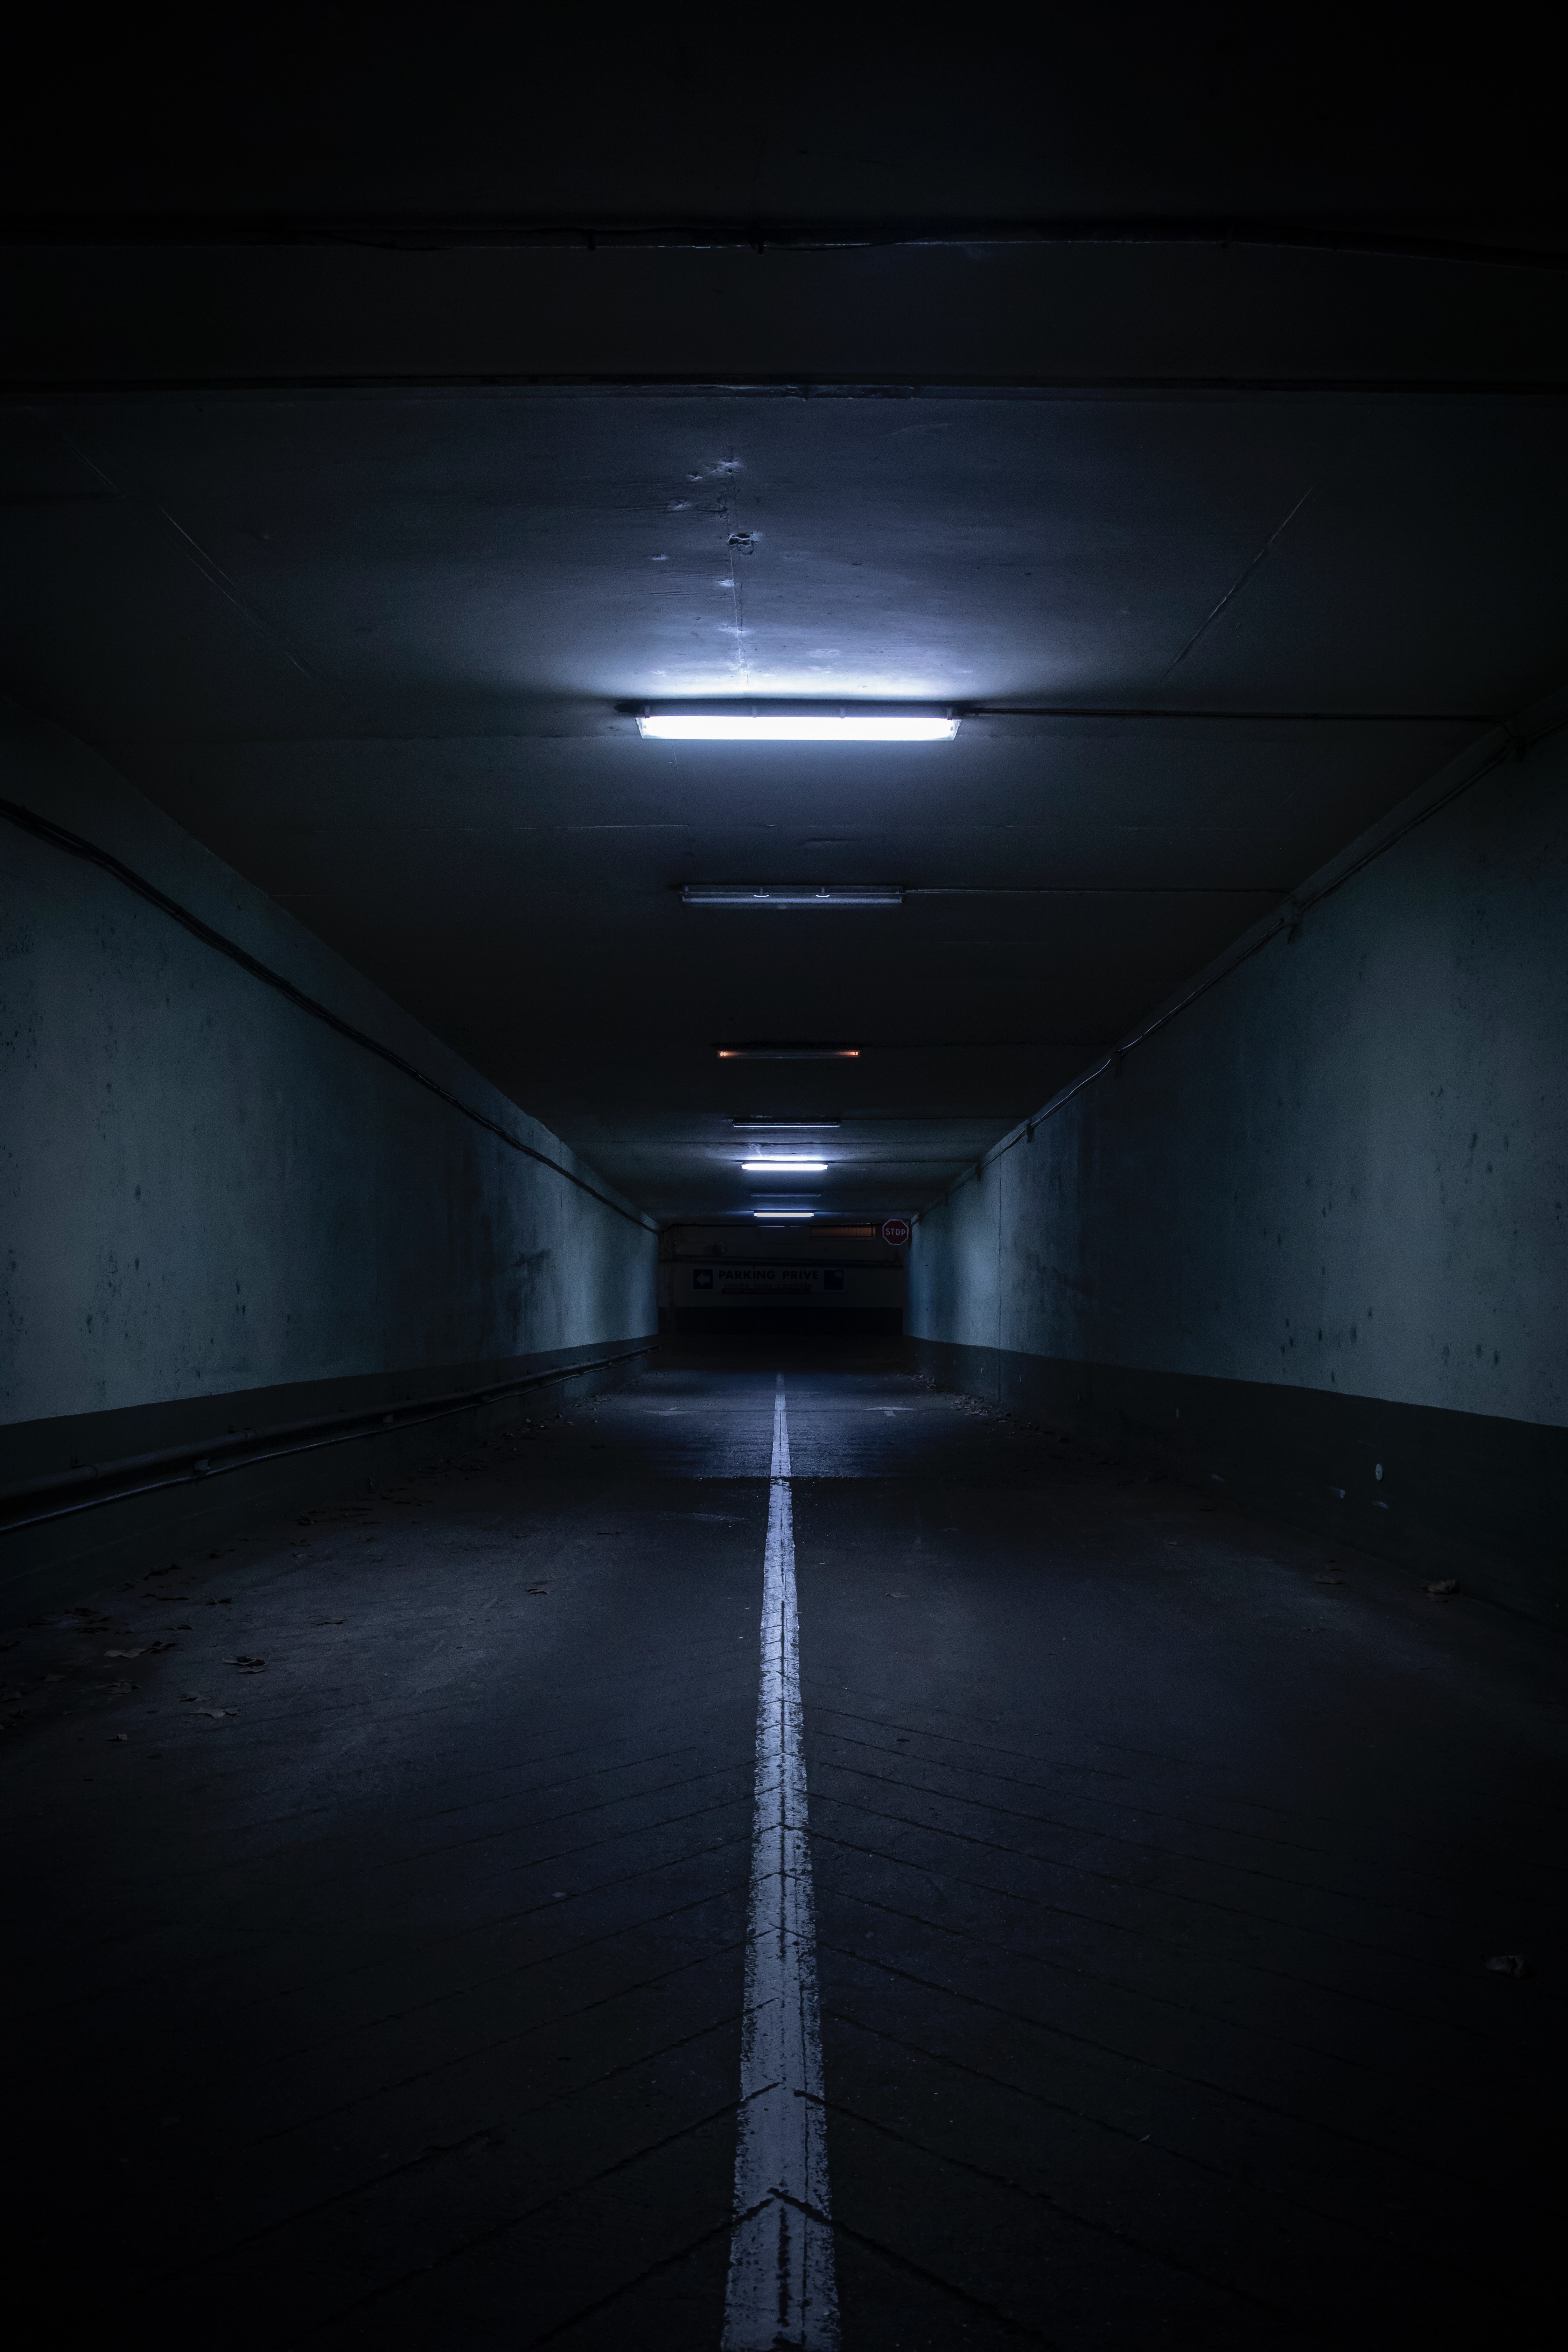 Popular Tunnel Image for Phone